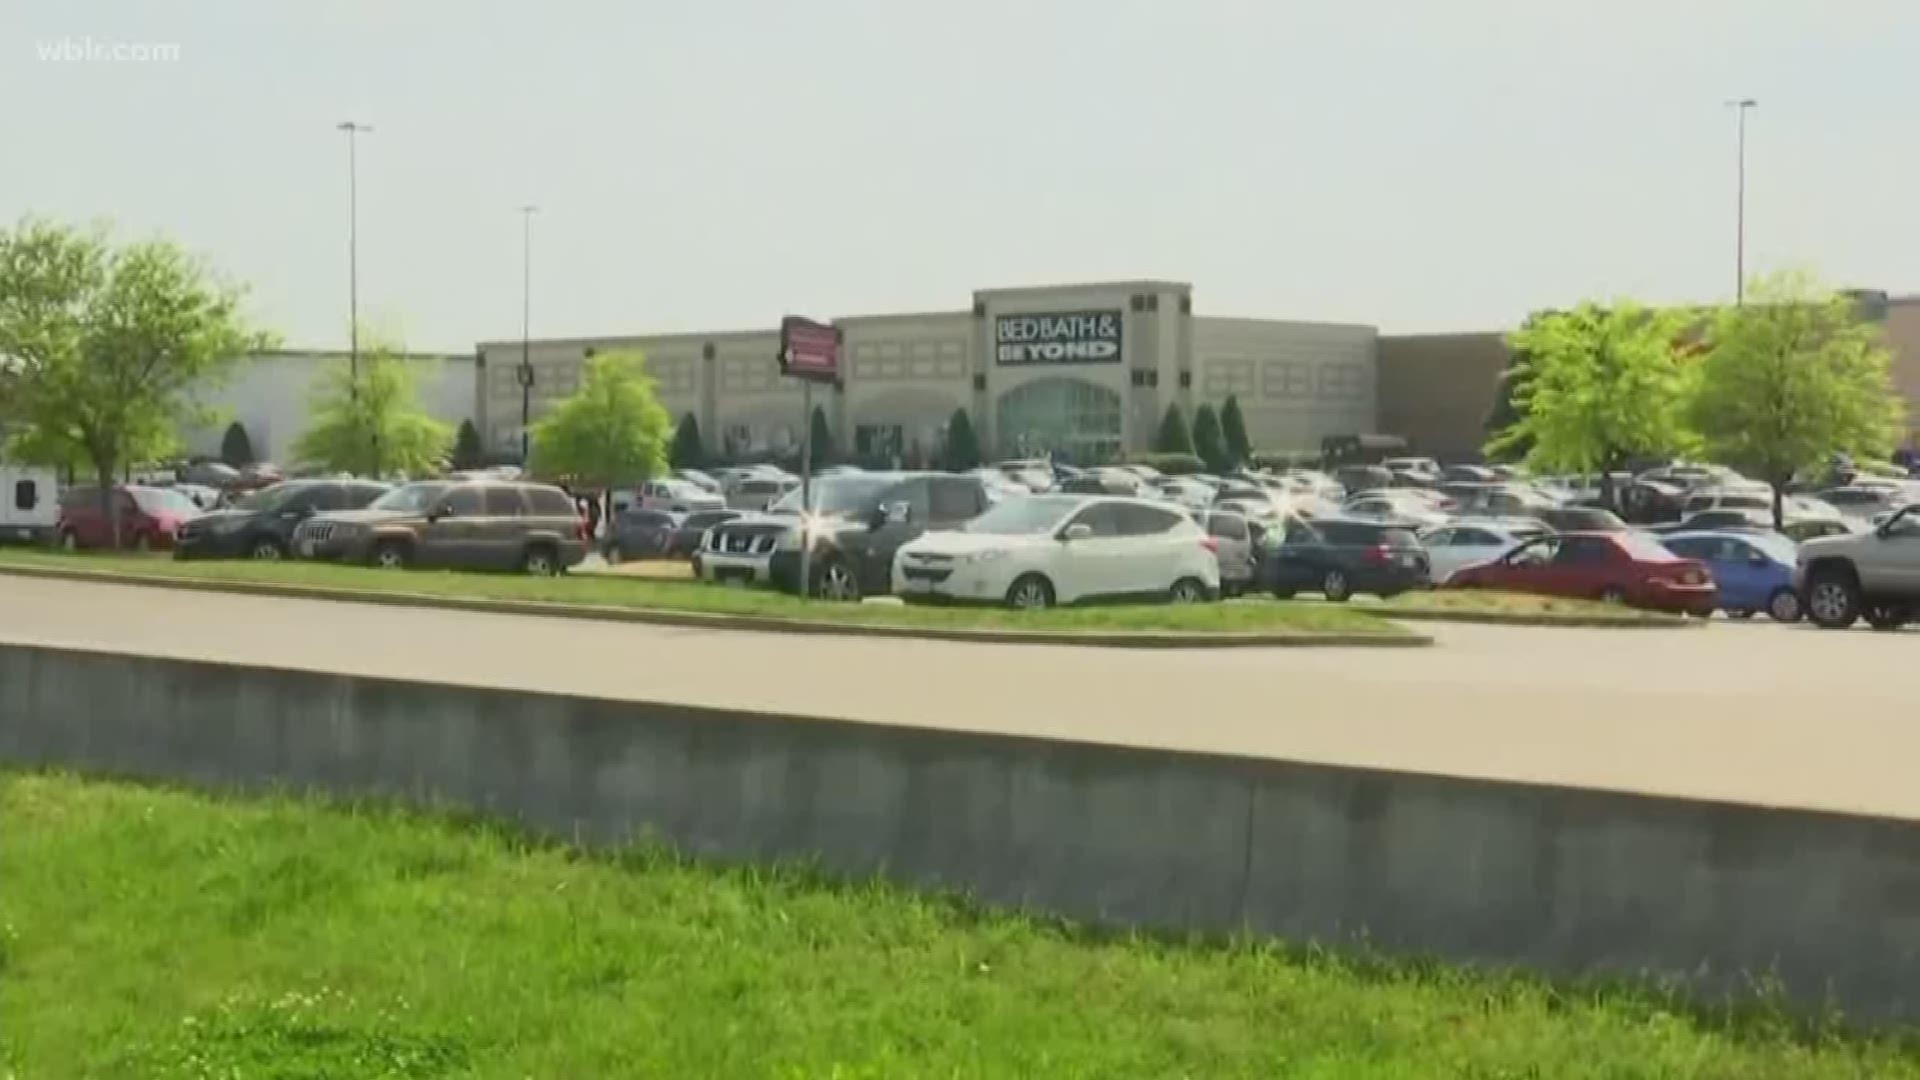 May 3, 2018: Police say one person has died after a shooting at the Opry Mills Mall in Nashville.